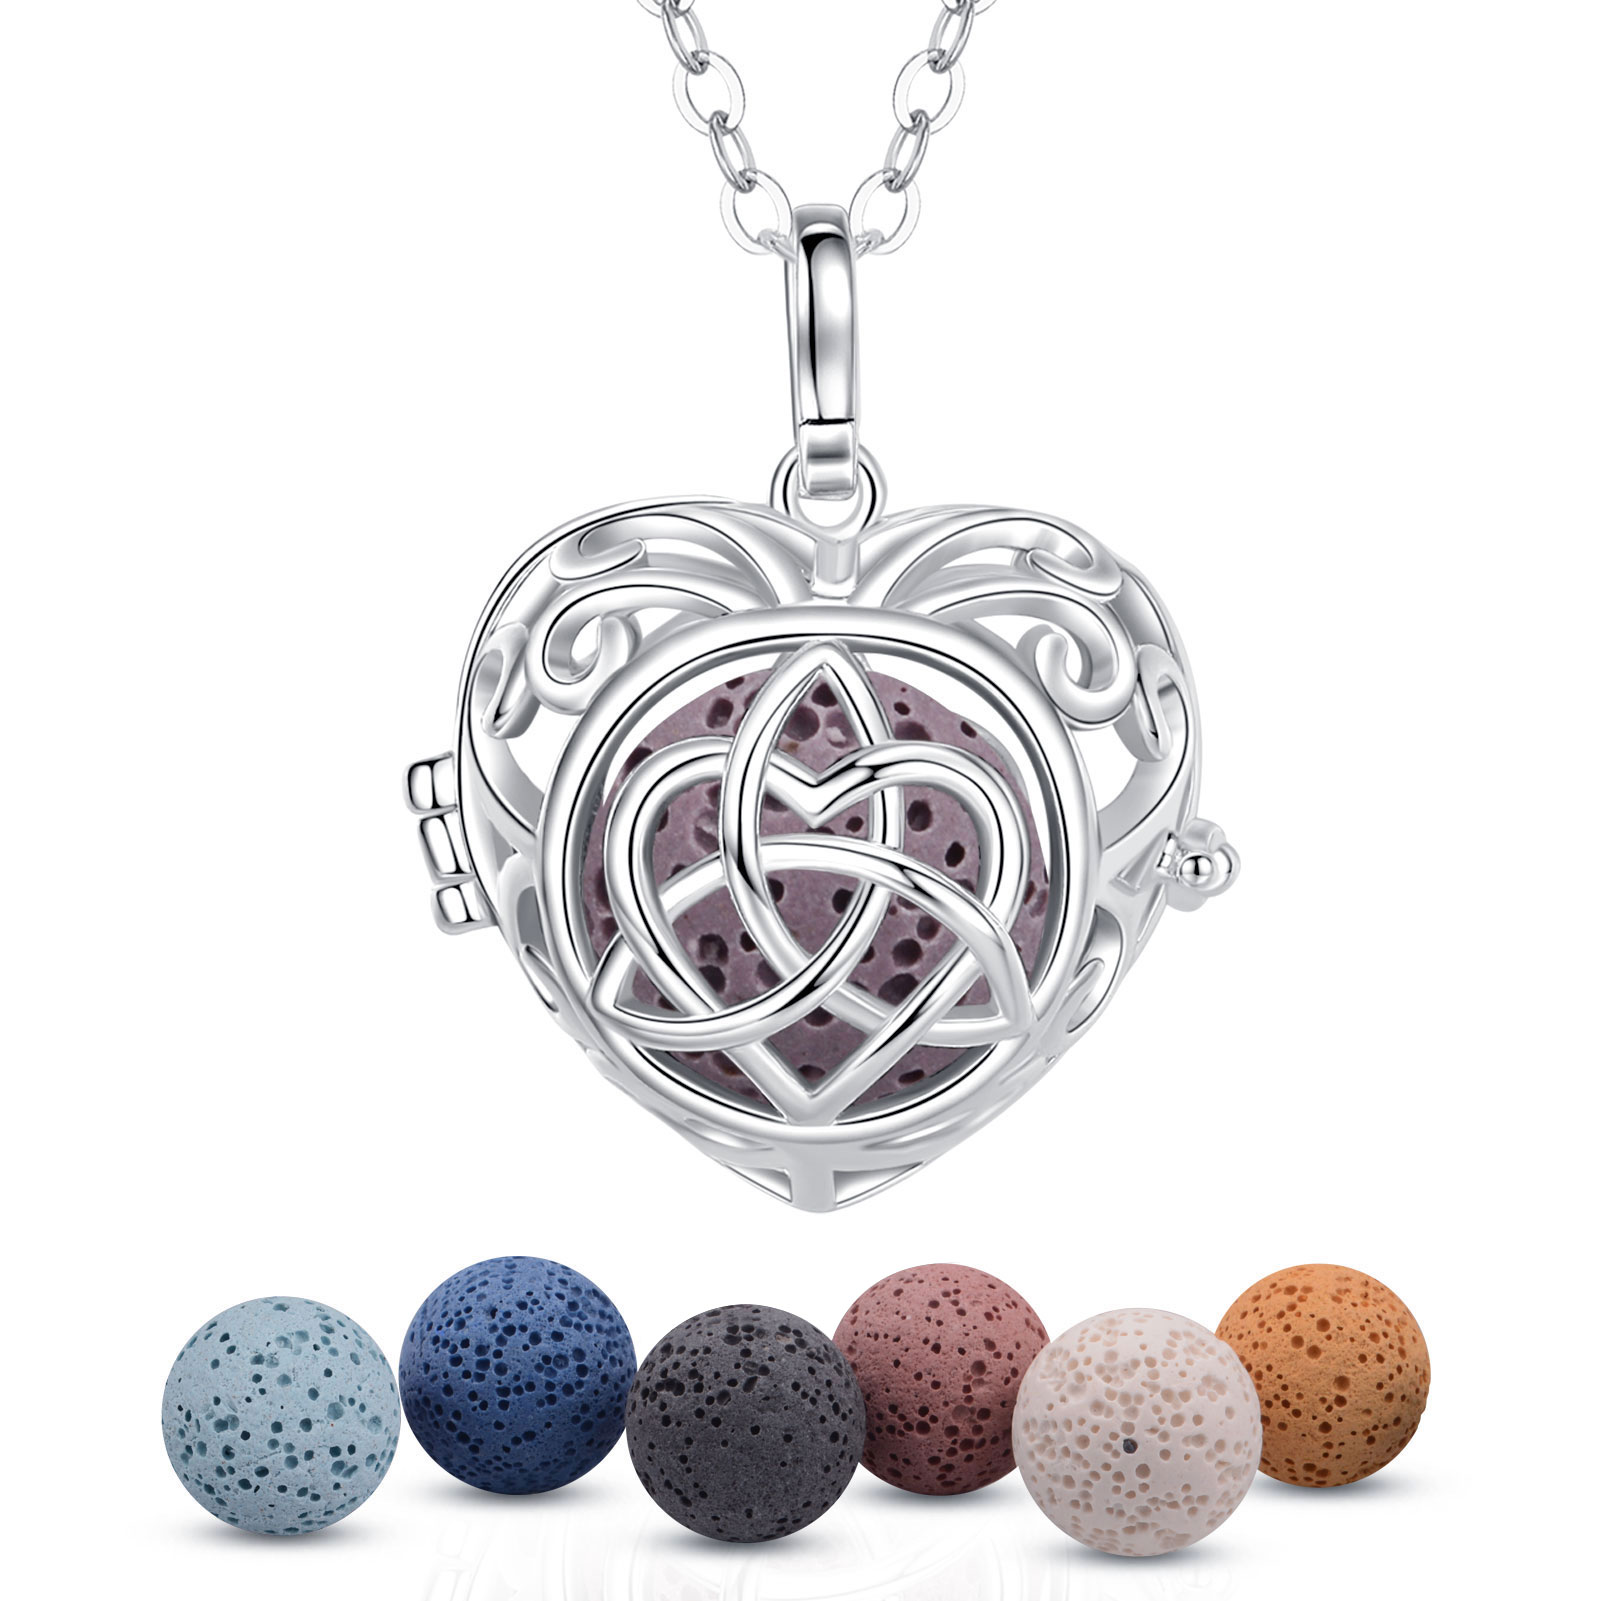 Merryshine Jewelry Aromatherapy Essential Oils Diffuser Heart Cage Lava Rock Stone Beads Necklace